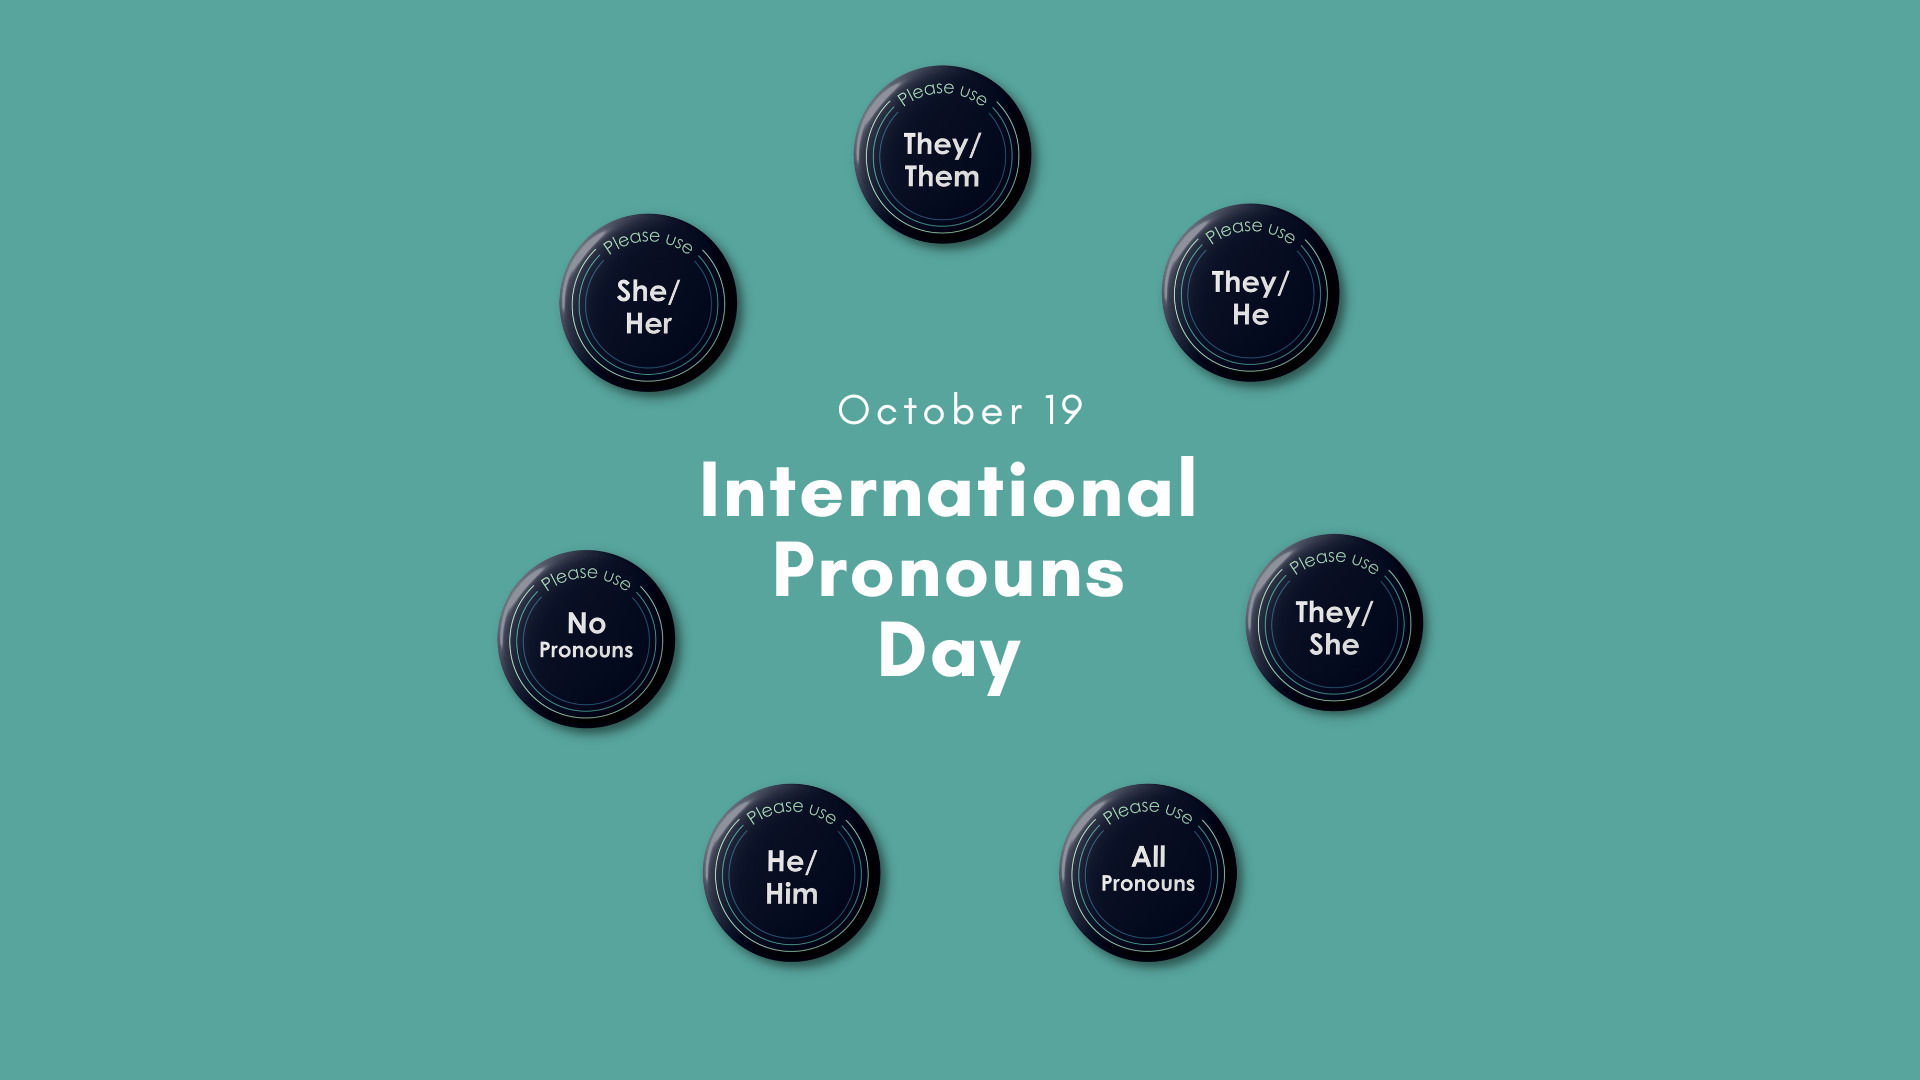 Seven small dark blue pronoun buttons in a circle with "She/her" "He/him" "They/them" "They/she" "They/he" "All pronouns" "No pronouns" written on each button. Text in the middle reads "October 19 International Pronouns Day" on a mint green background.